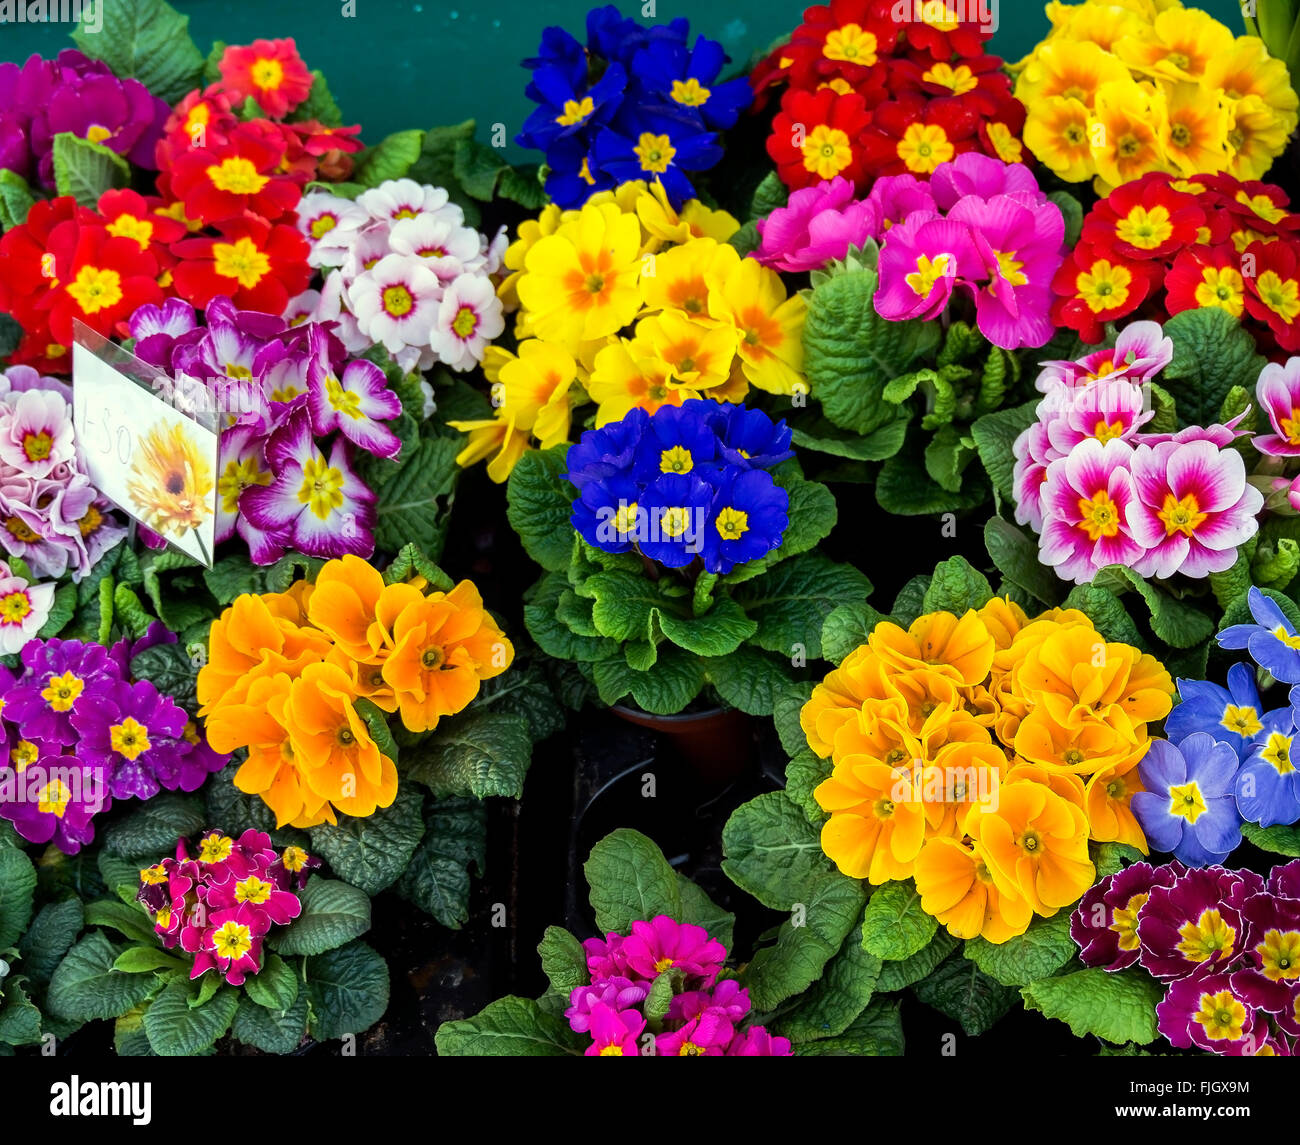 Pots of primroses / primula for sale at a florist's shop are a sign of the arrival of spring. Stock Photo